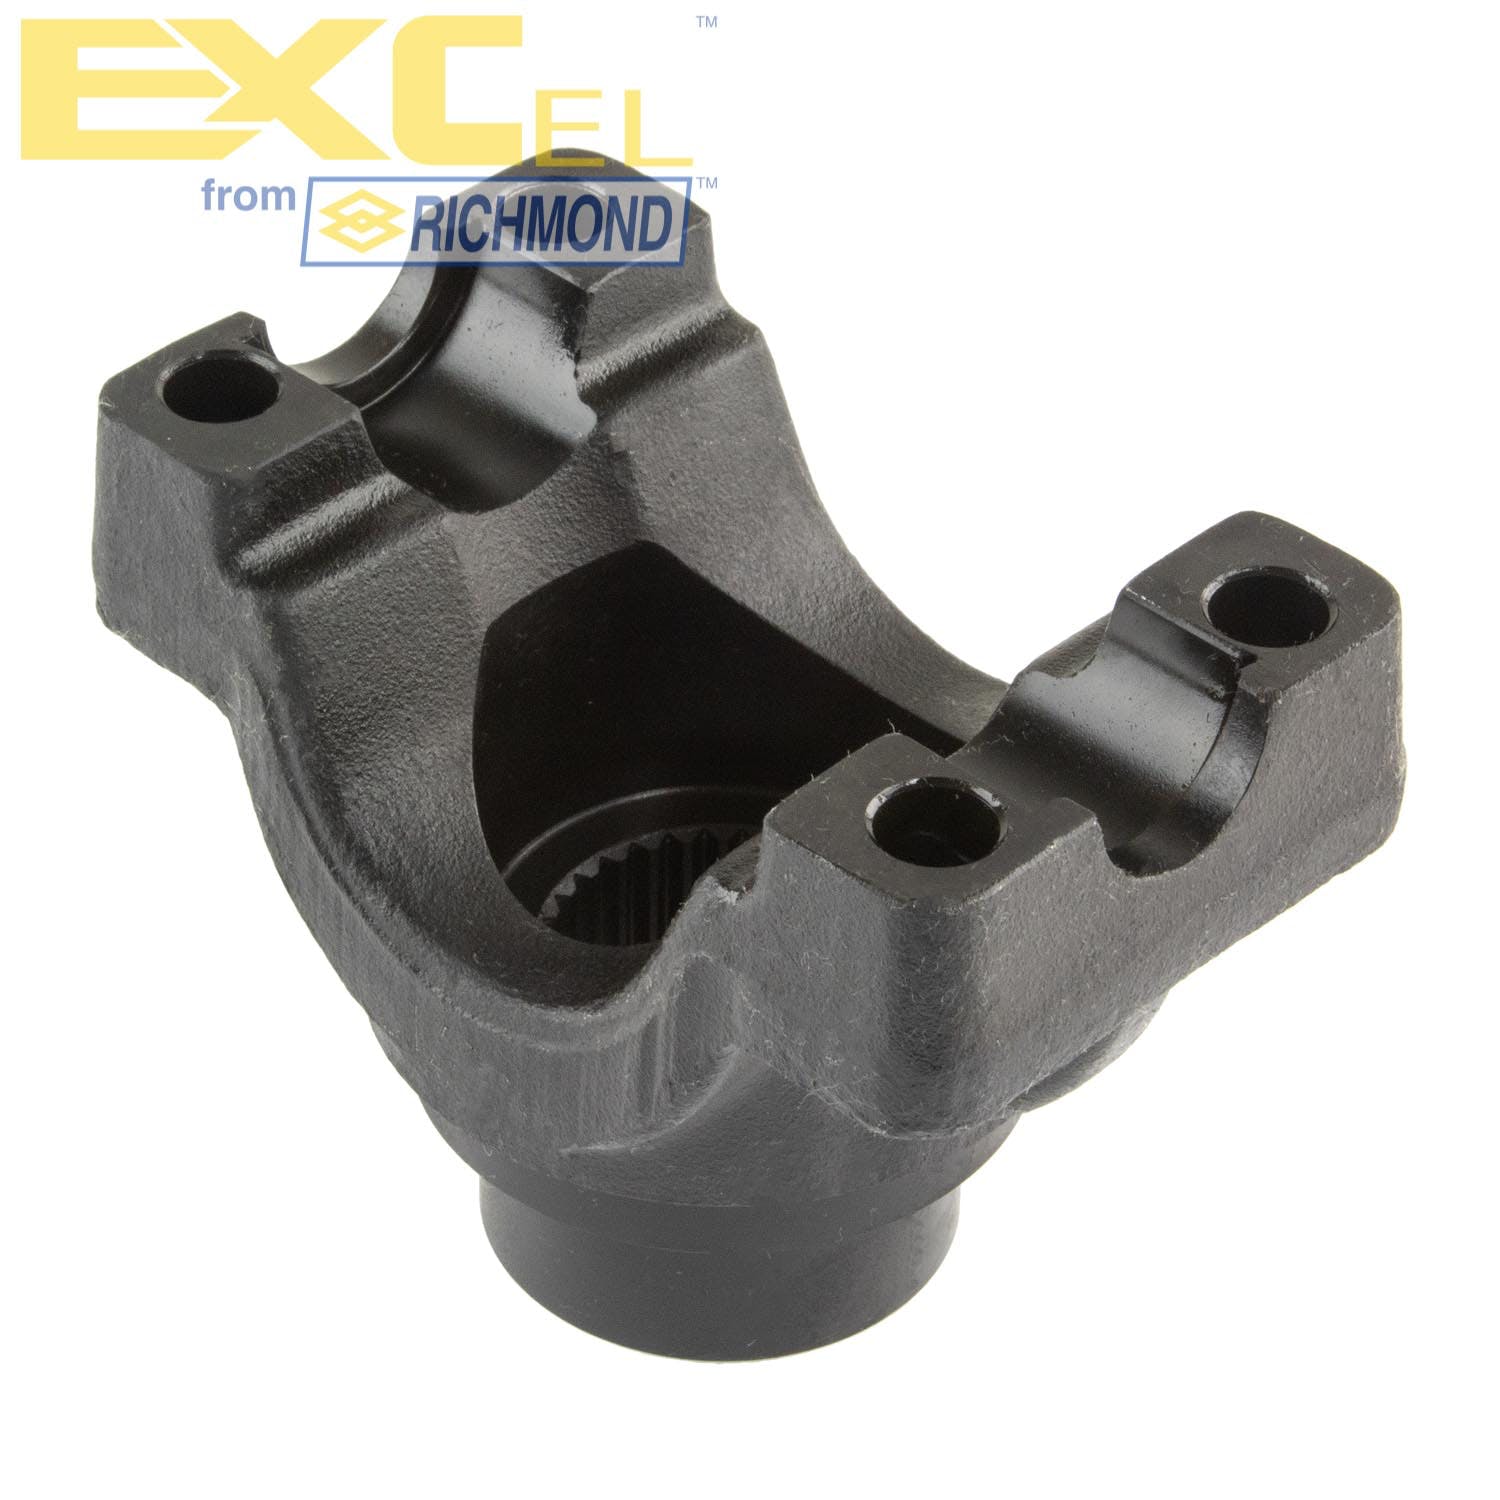 Excel 96-2510 Forged, U-Bolt Style